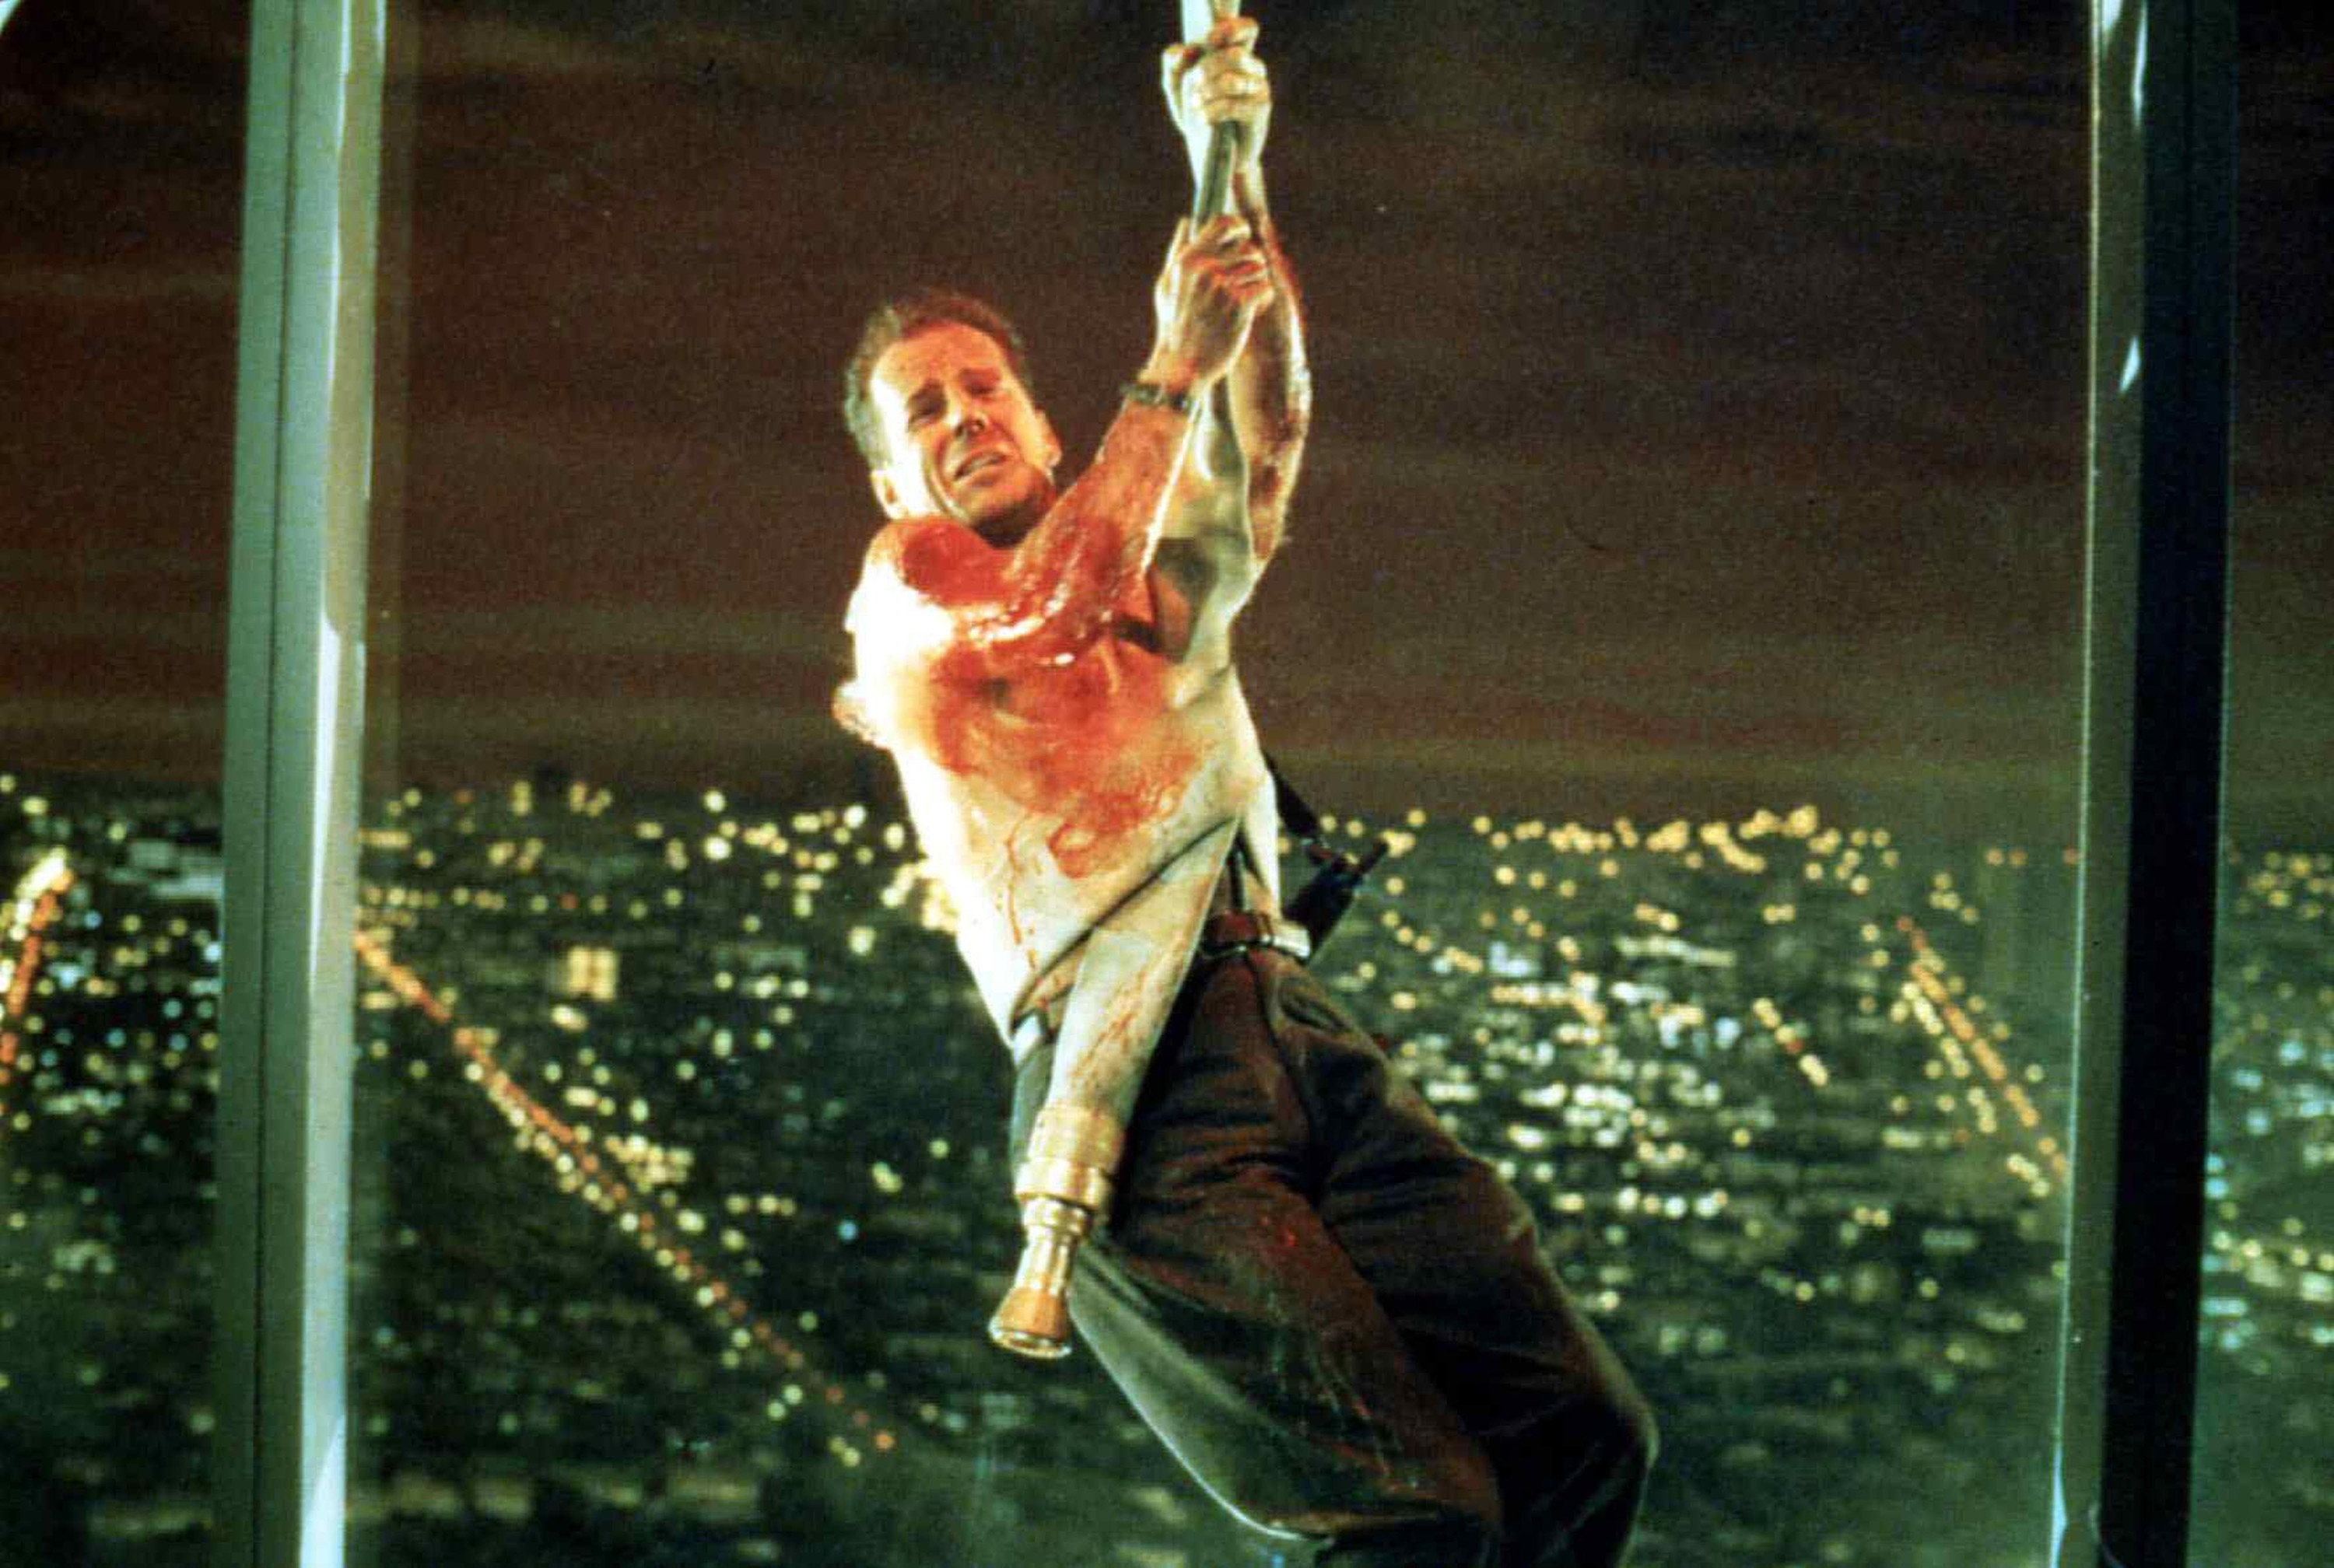 A bloodied man in a tanktop and jeans swings into a building window with a fire hose